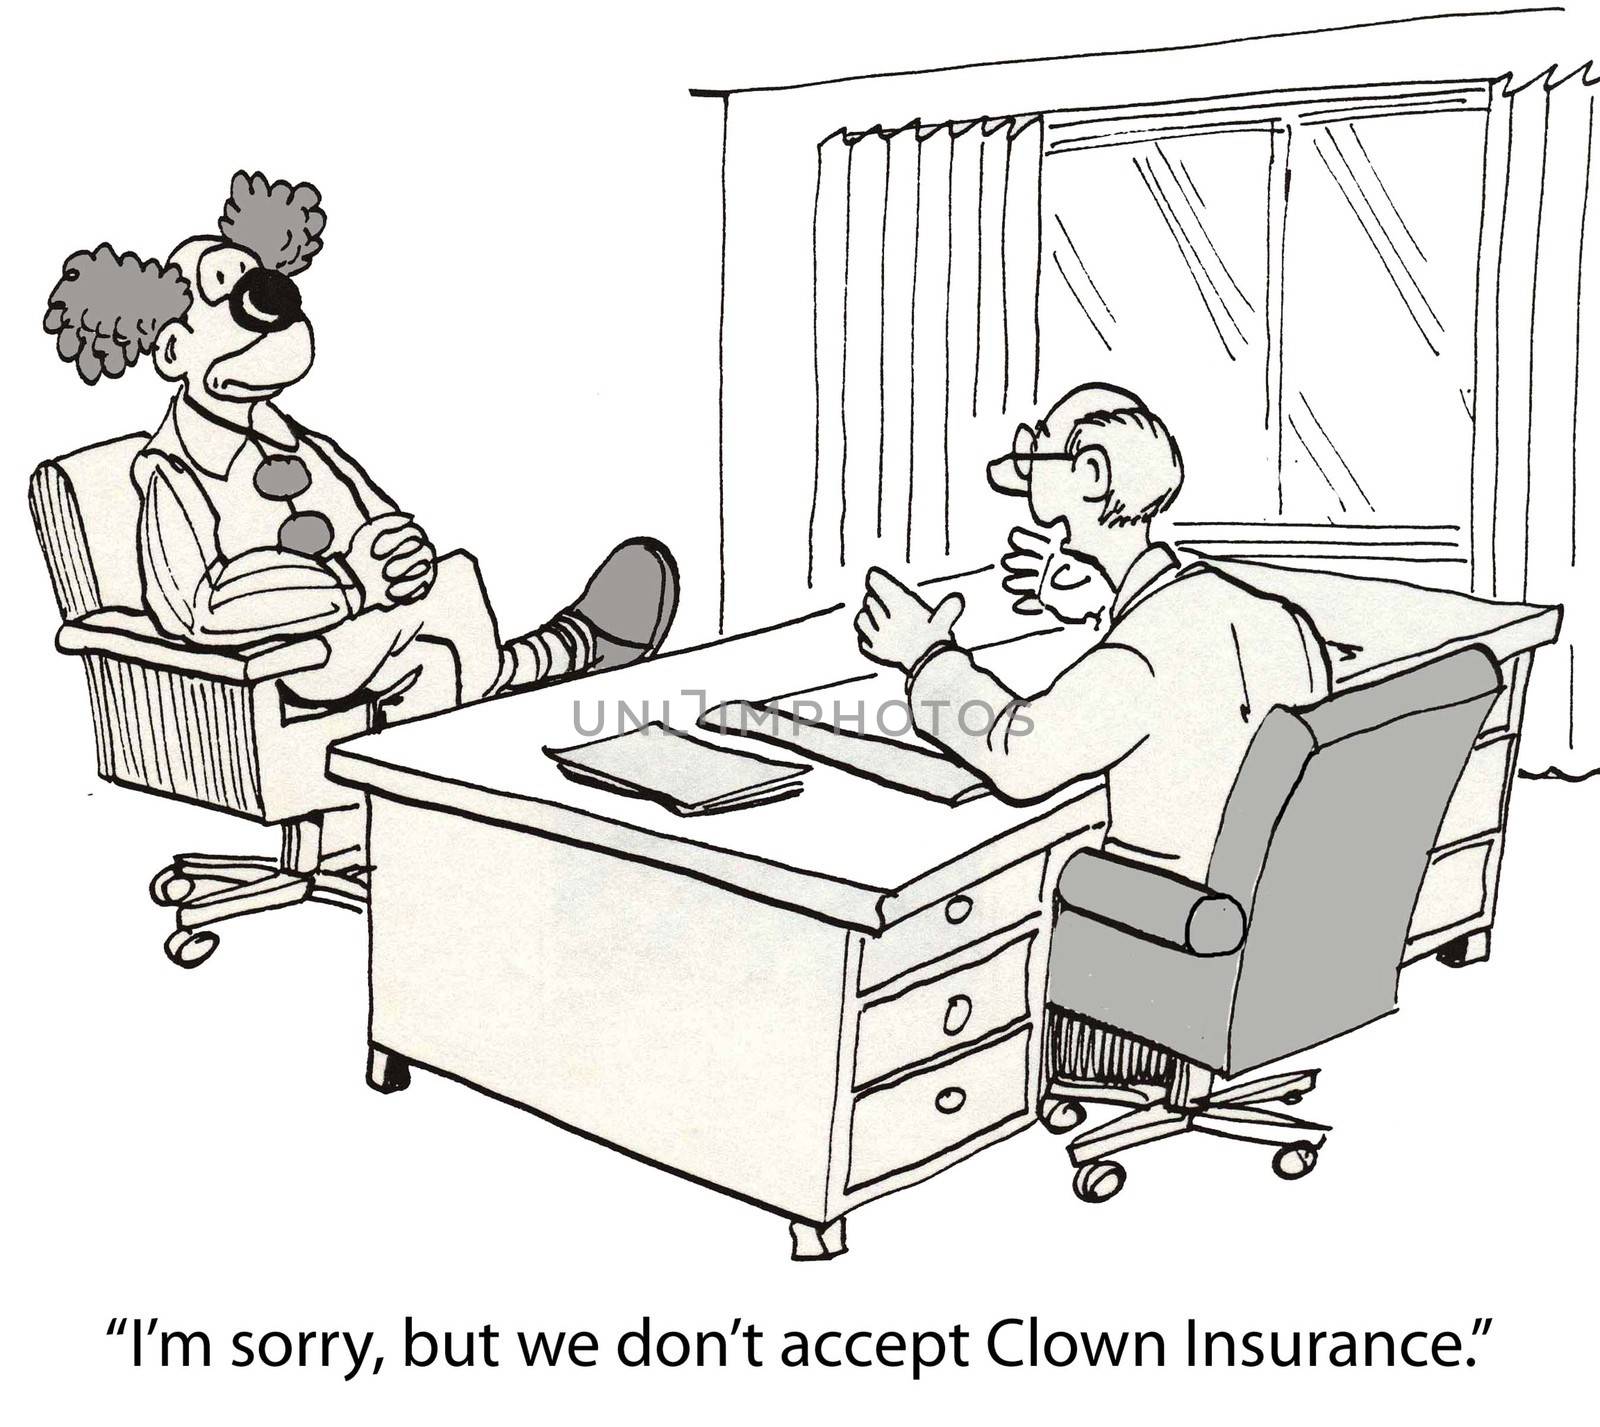 "I'm sorry, but we don't accept Clown Insurance."